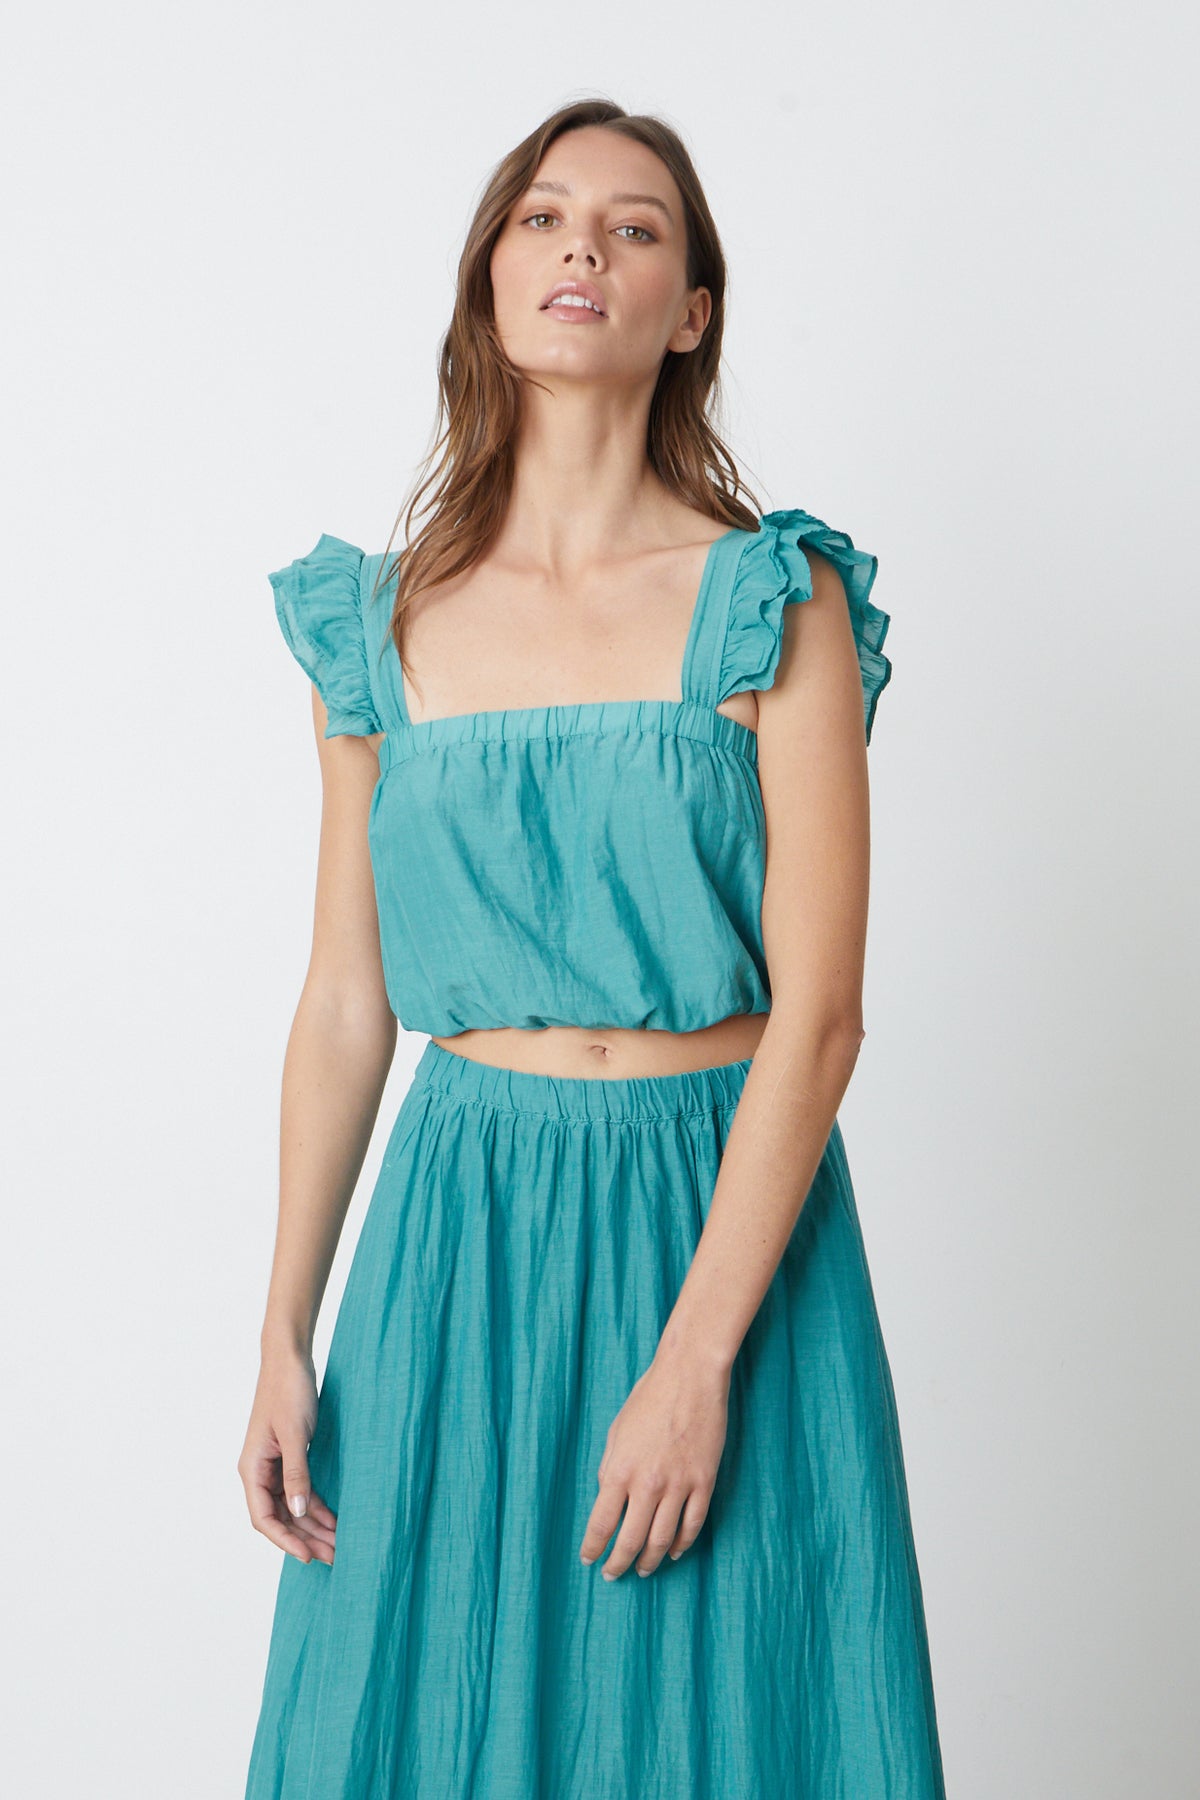 The model is wearing a CROPPED TANK TOP by Velvet by Graham & Spencer with ruffled sleeves.-26342712017089